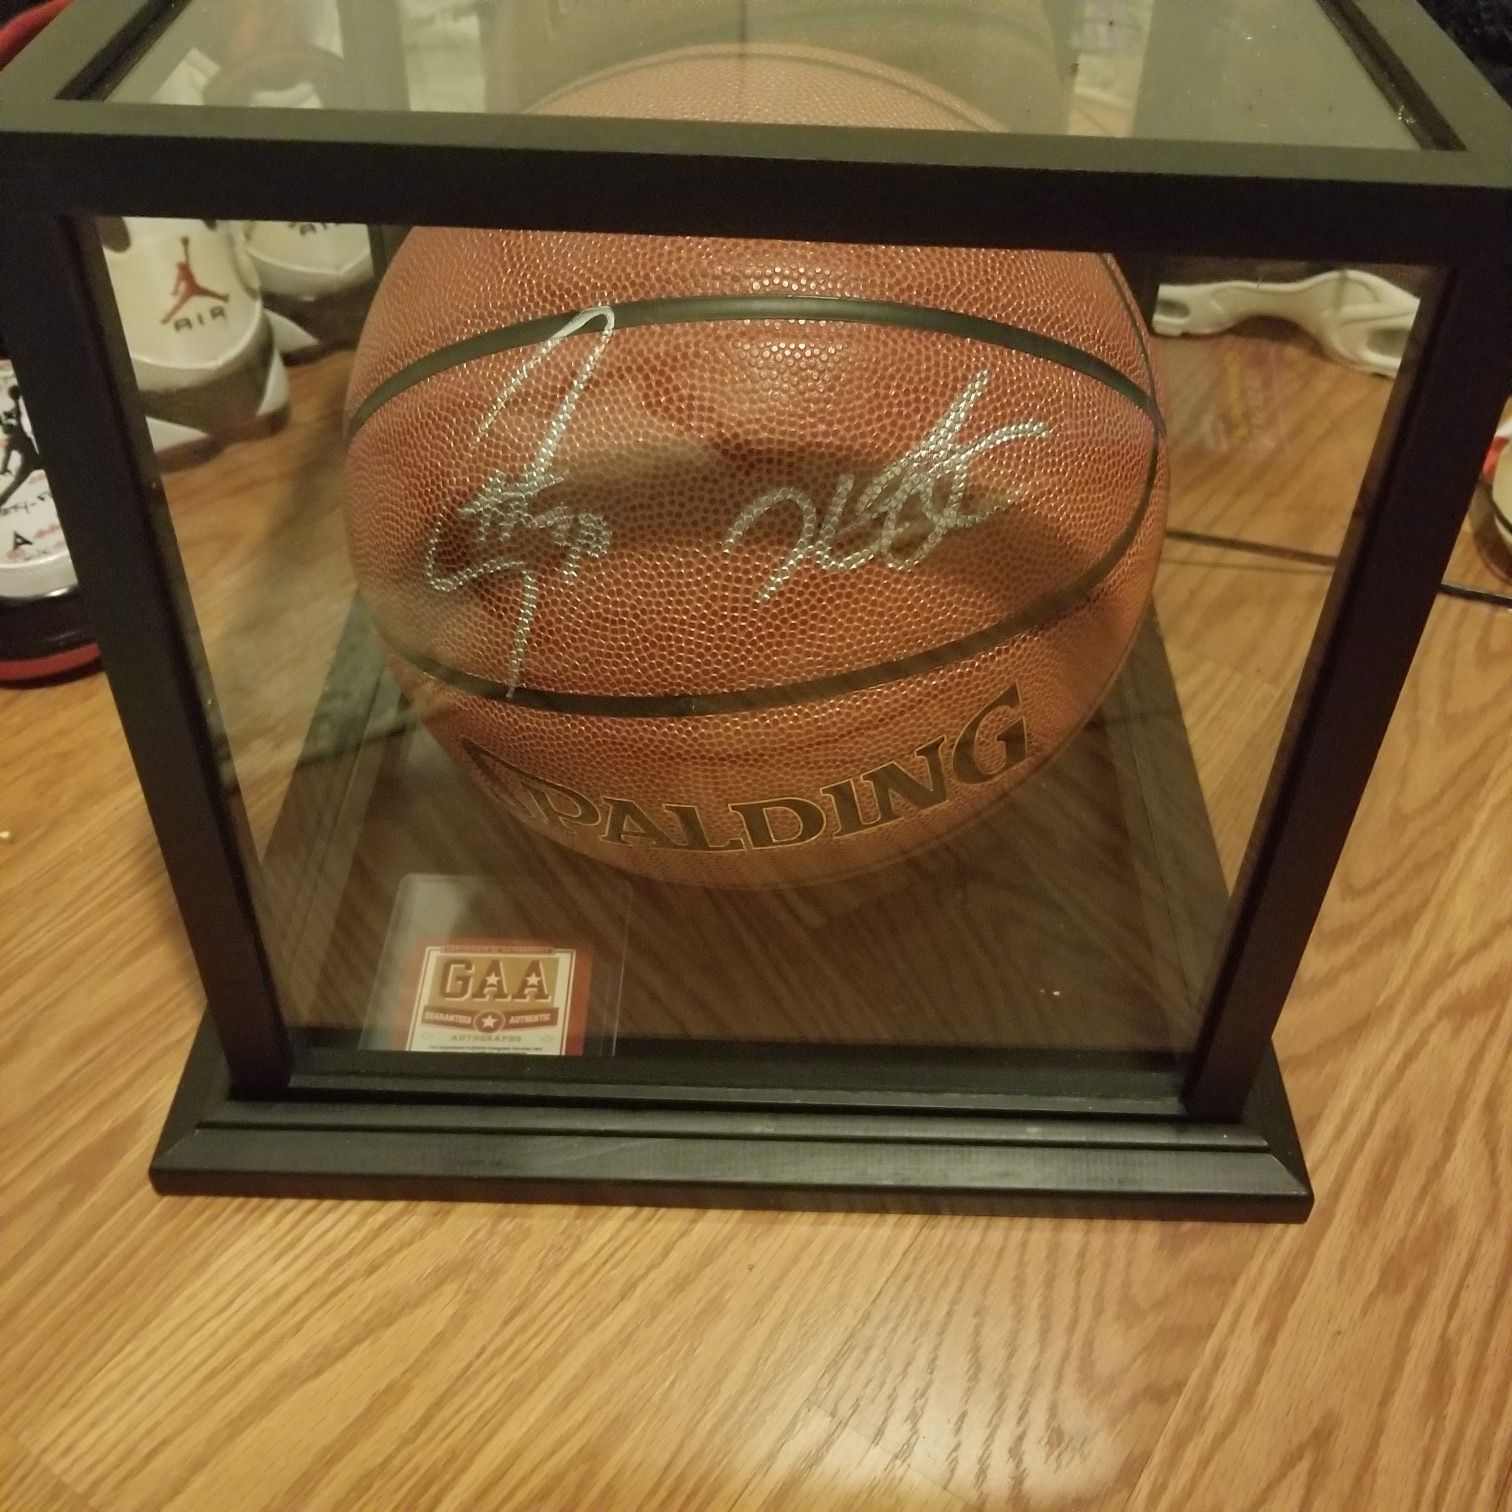 Warriors steph curry and Kevin Durant signed ball w COA